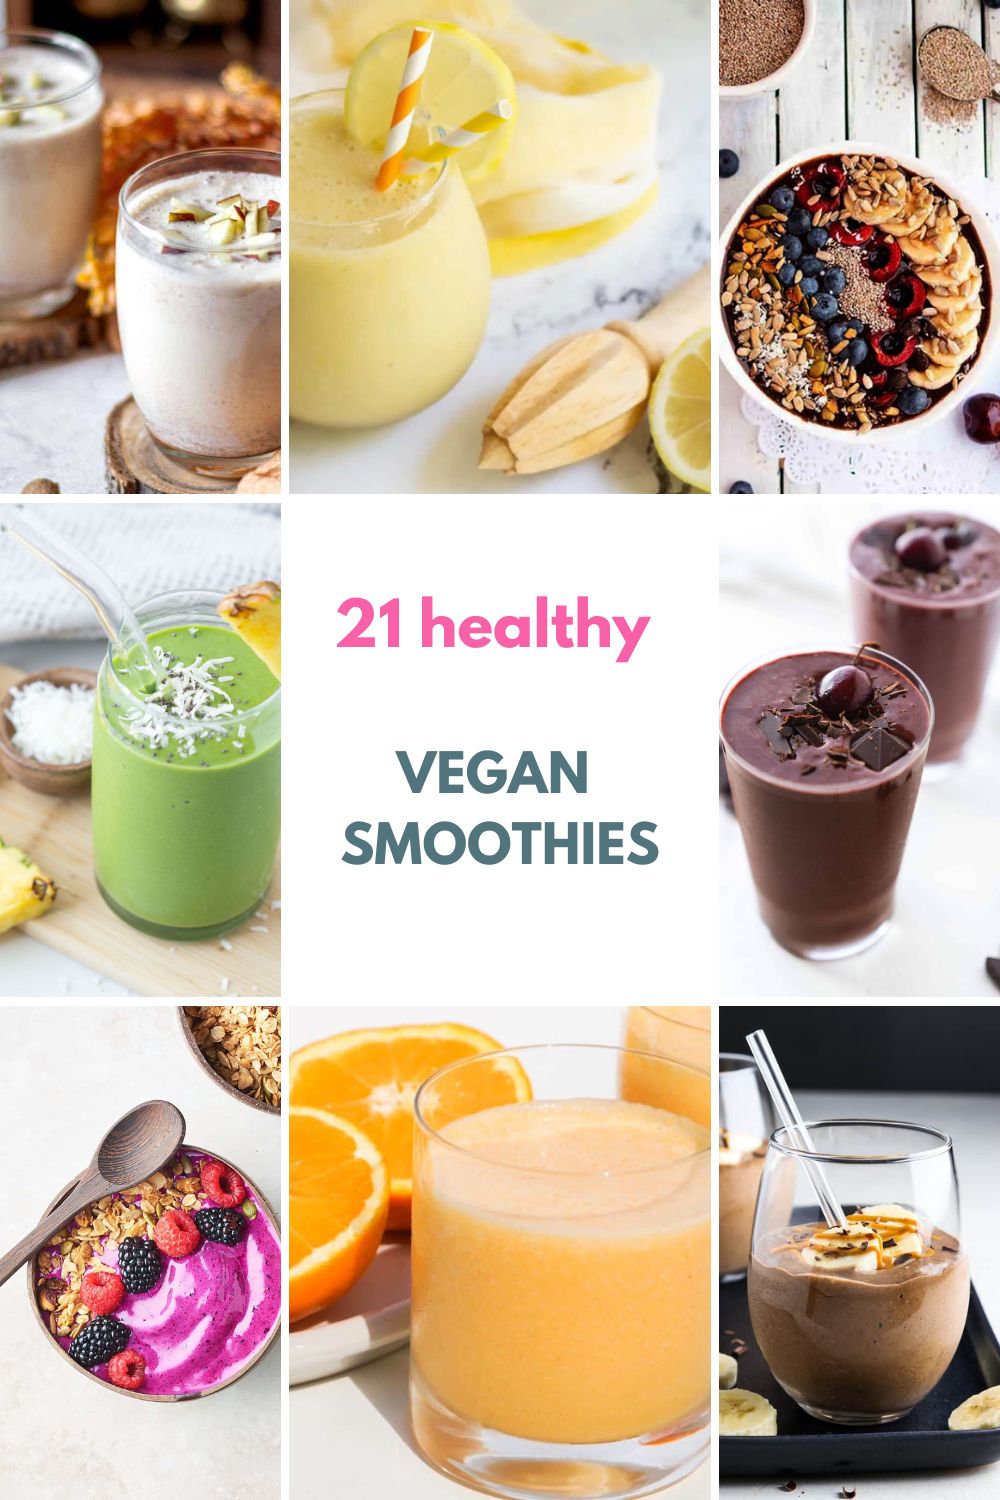 Title photo stating 21 Healthy Vegan Smoothies with 8 picture of smoothies. 